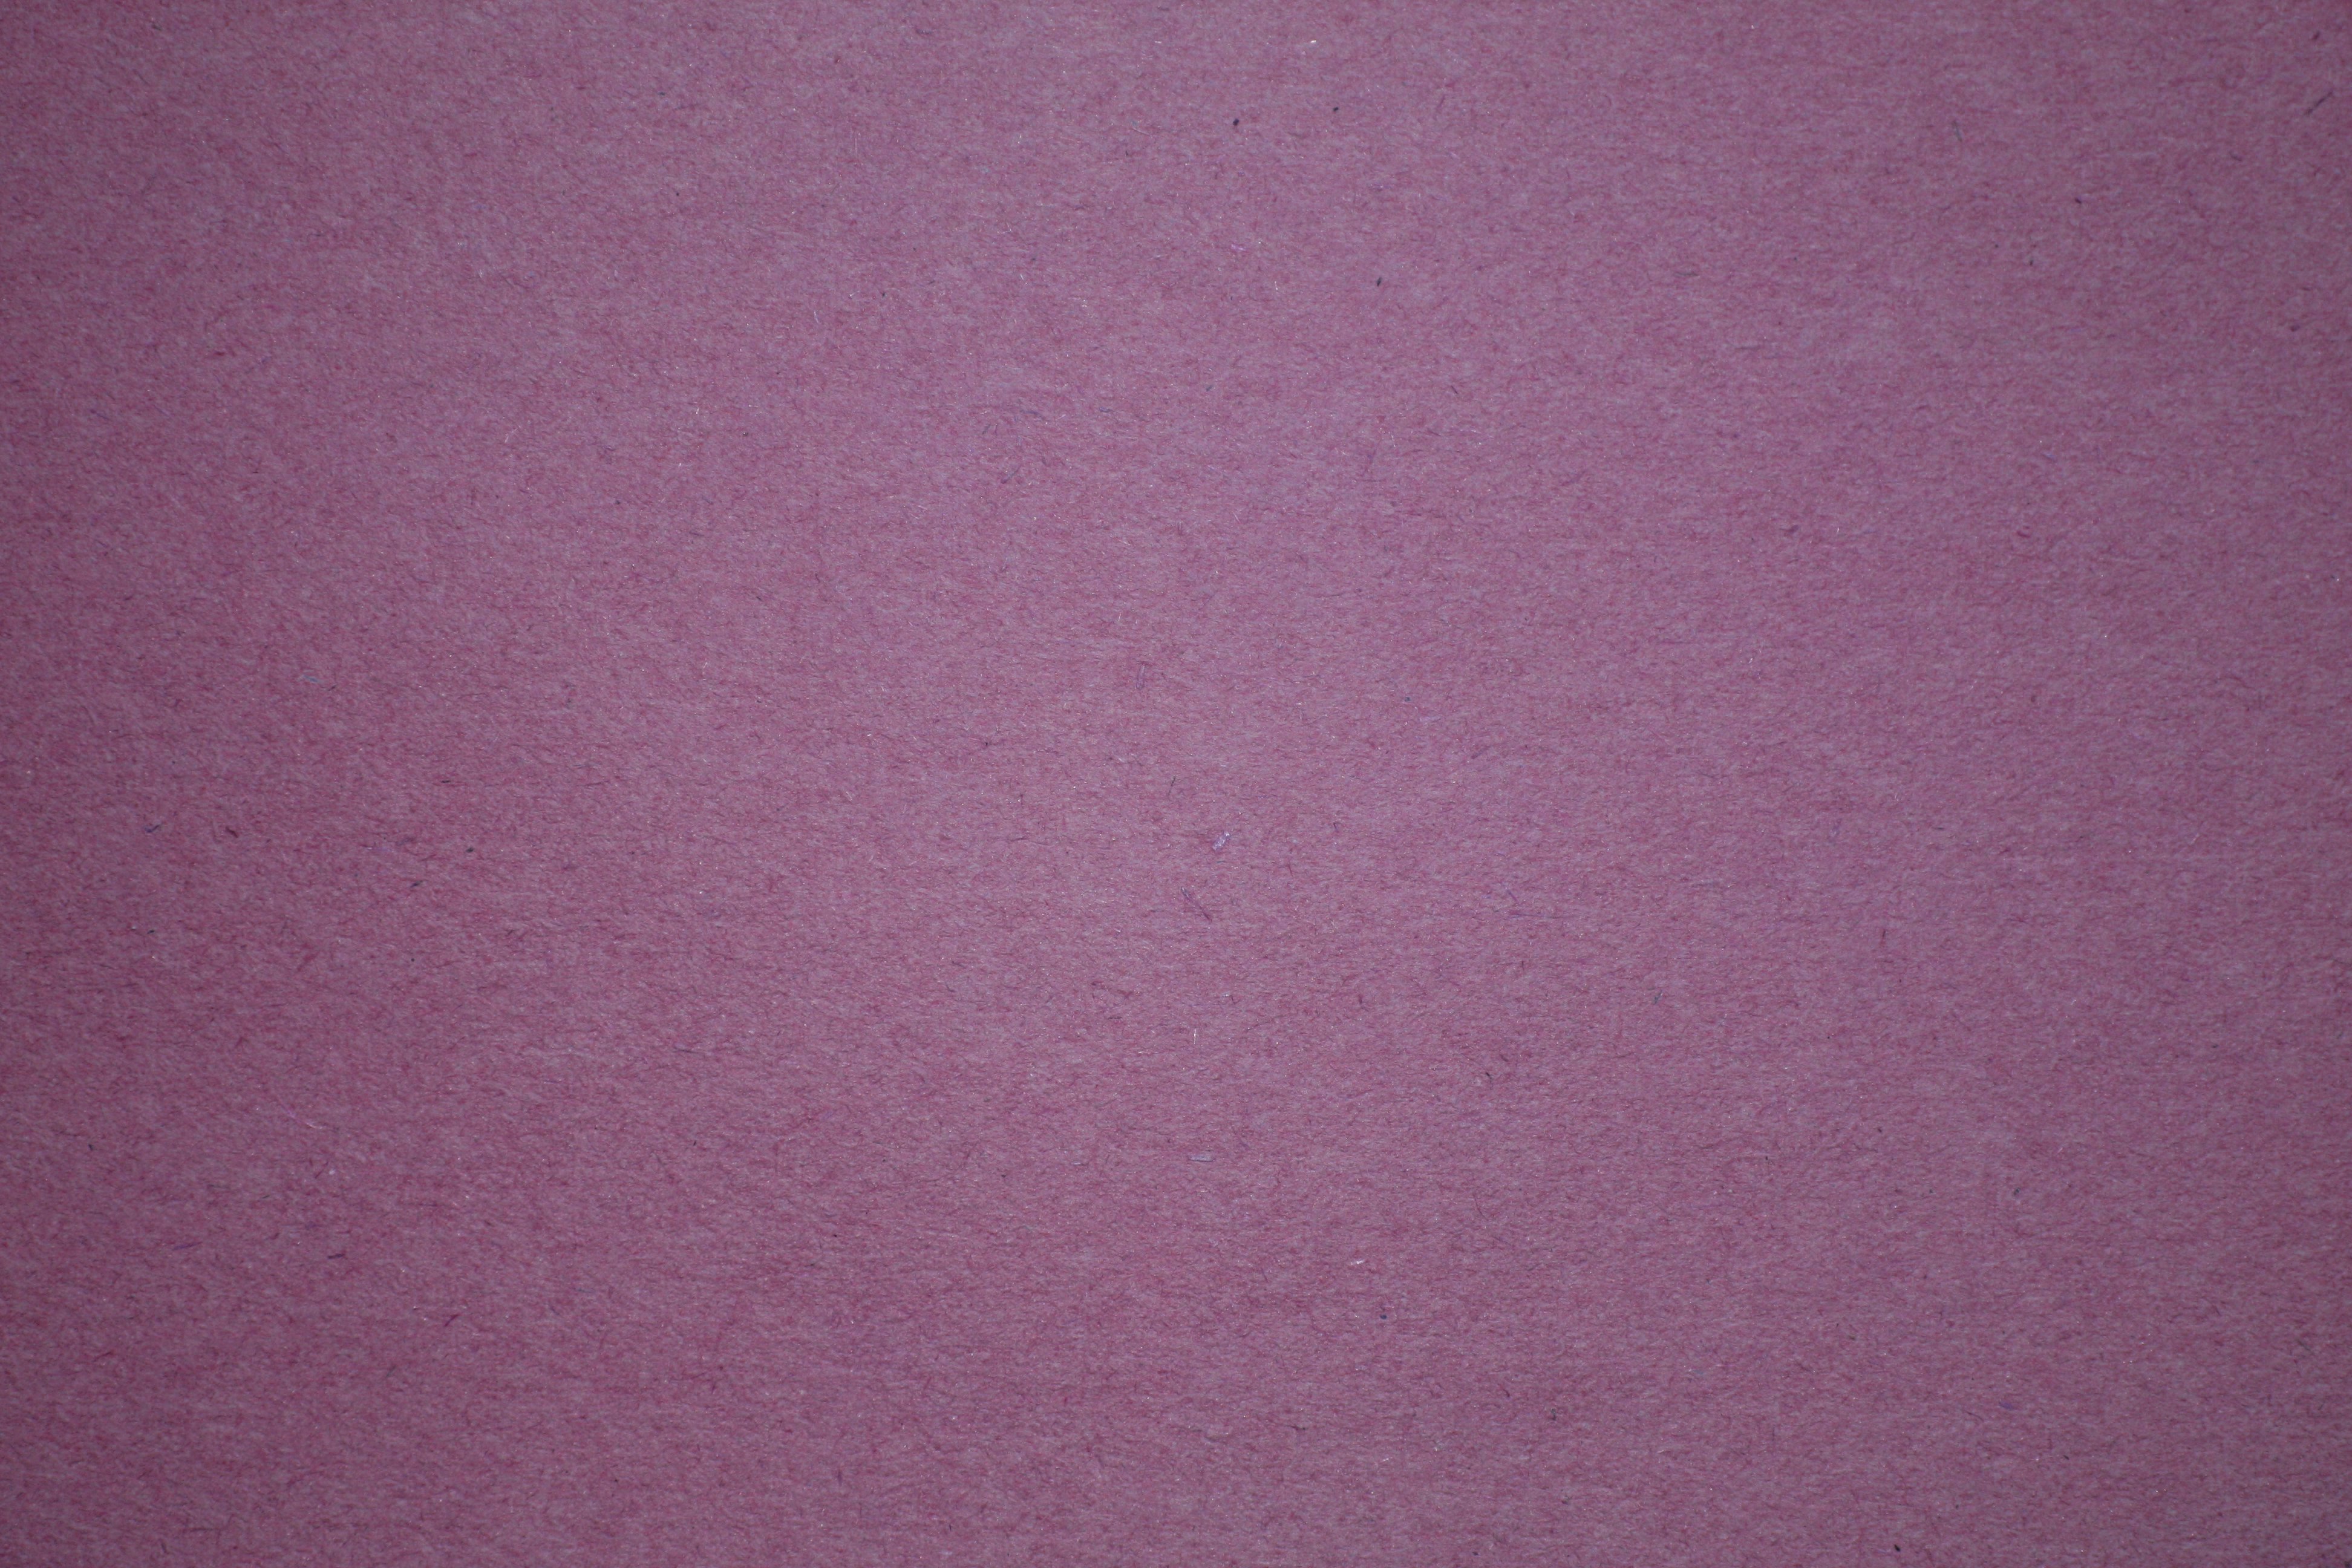 Purple Construction Paper Texture: Over 2,694 Royalty-Free Licensable Stock  Illustrations & Drawings